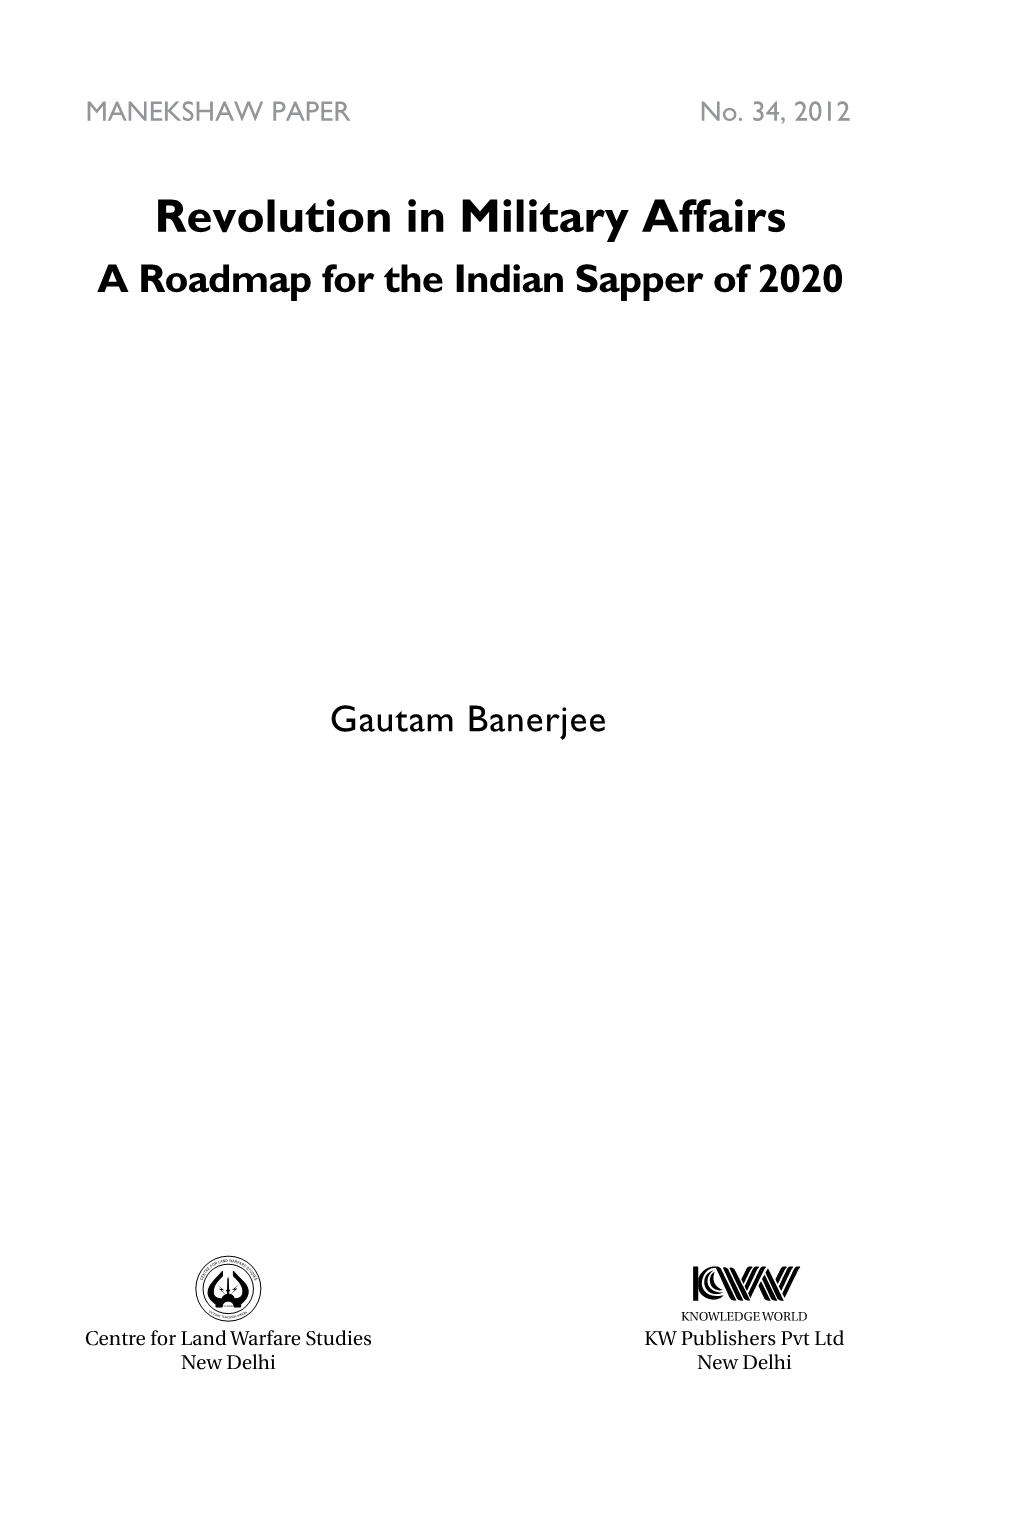 Revolution in Military Affairs: a Roadmap for the Indian Sapper of 2020 2 Chapter 1: Past, Present And